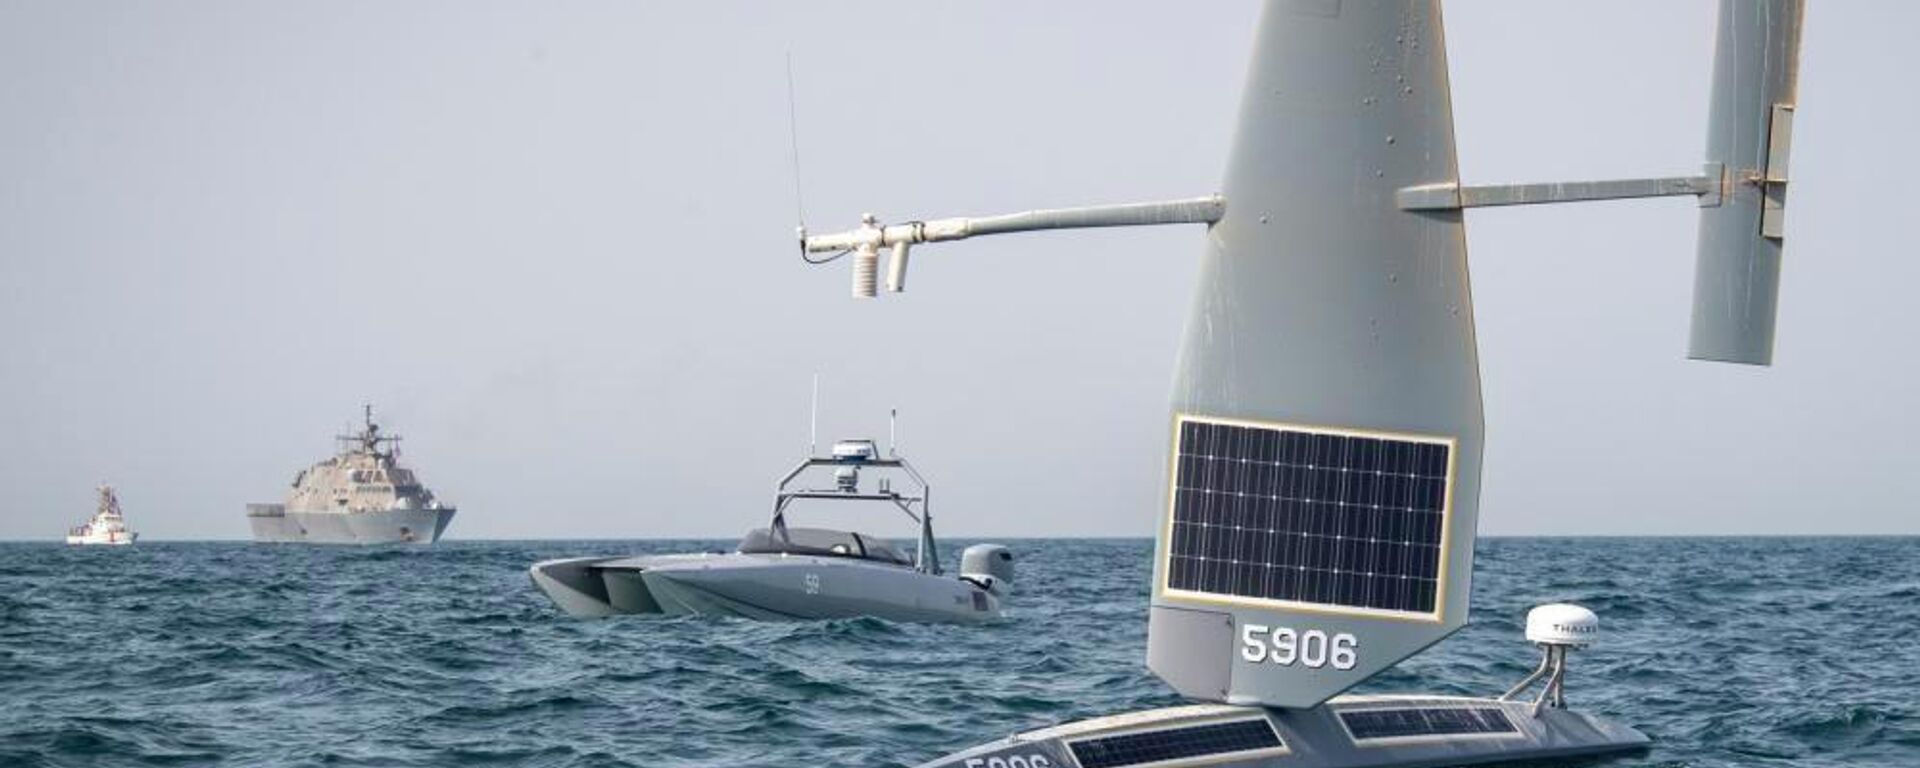 In this image provided by the U.S. Navy, a Saildrone Explorer, front to rear, a Devil Ray T-38 crewless vessel, a littoral combat ship, and a U.S. Coast Guard cutter sail in the Arabian Gulf, on June 26, 2022. The Navy is expediting development of drone ships aimed at expanding the reach of offensive firepower while keeping sailors on traditional warships farther from harm's way. (U.S. Navy photo by Chief Mass Communication Specialist Roland A. Franklin via AP) - Sputnik International, 1920, 01.08.2022